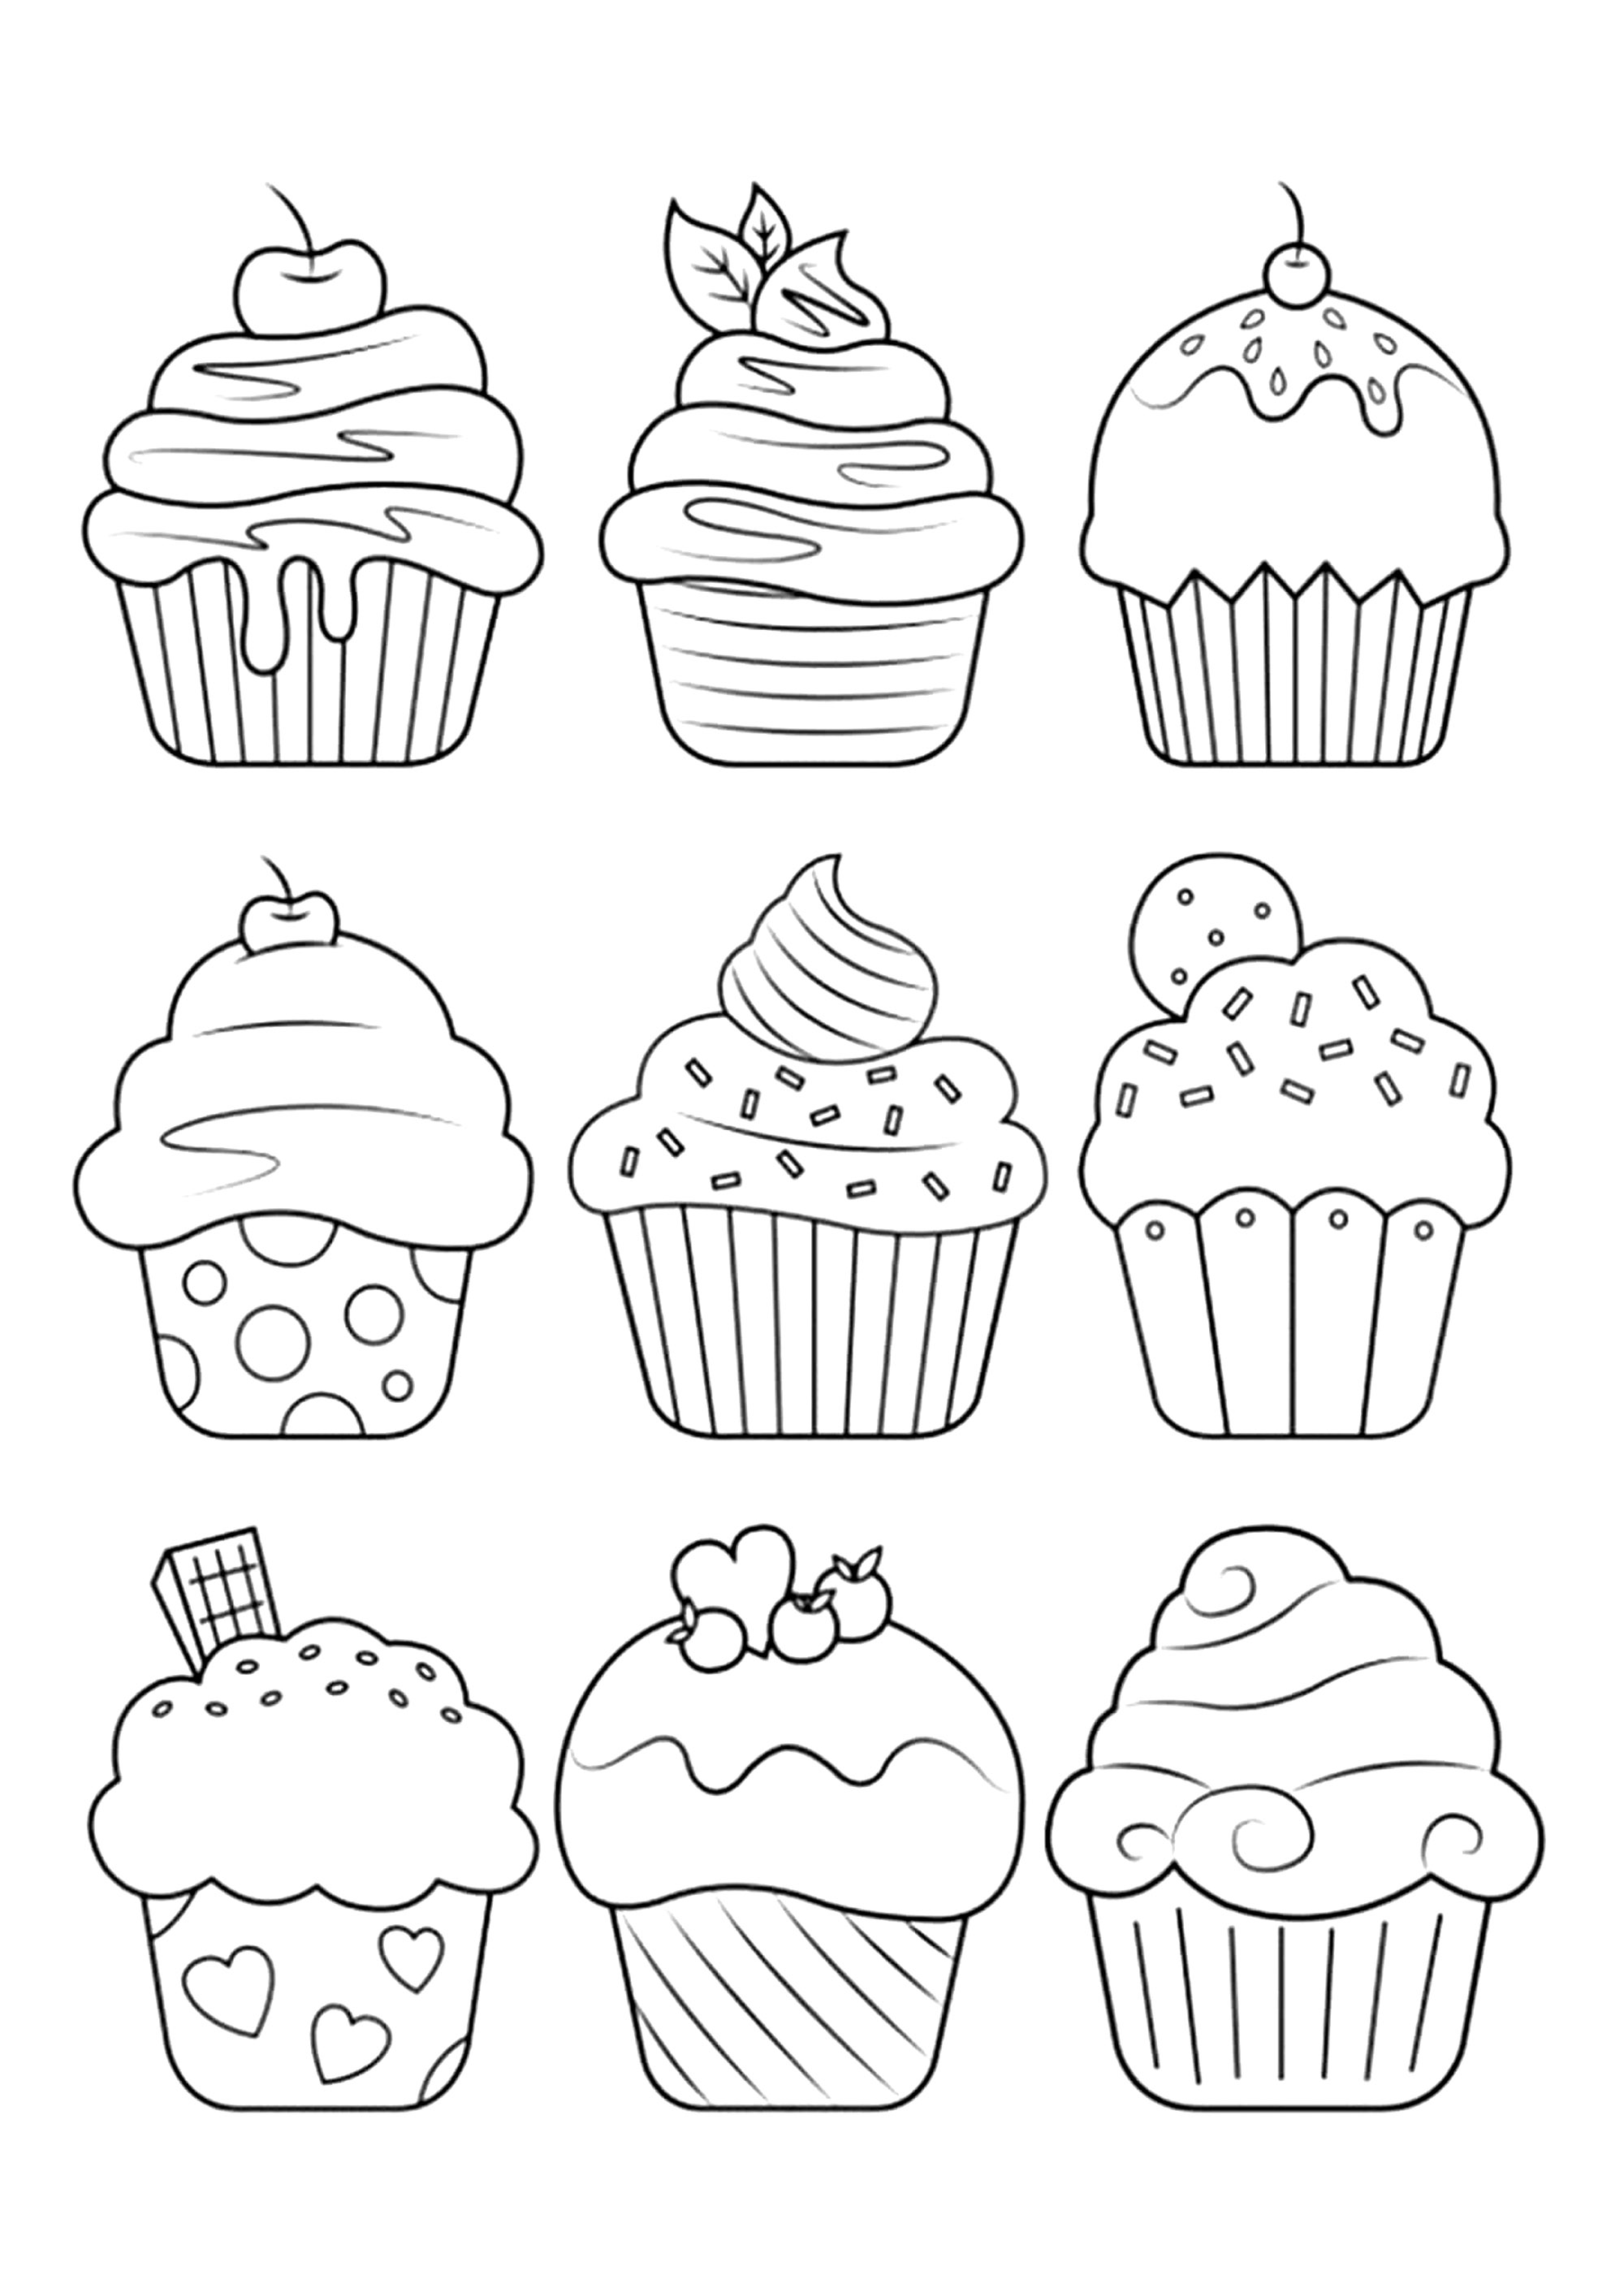 Nine pretty cupcakes to color